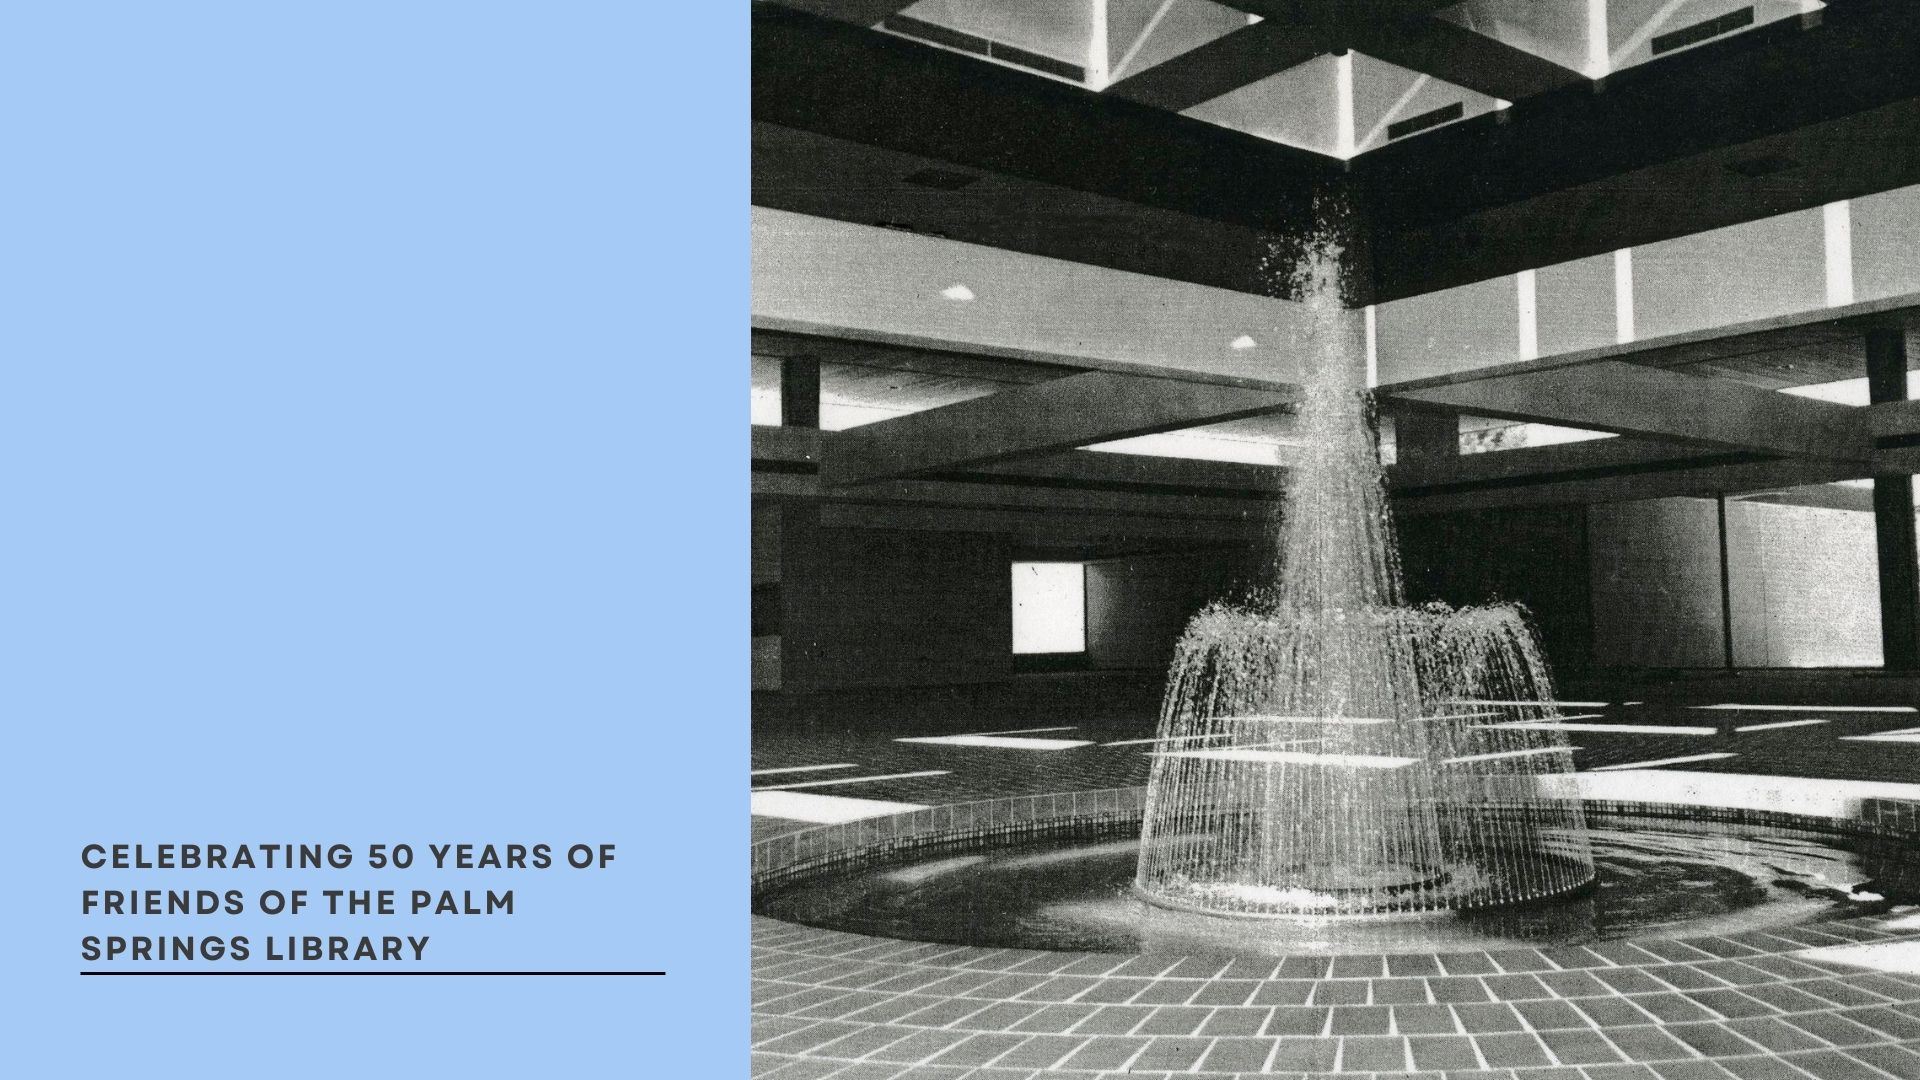 Celebrating 50 years of the friends of the palm springs library.  Image of original fountain in the palm springs library.